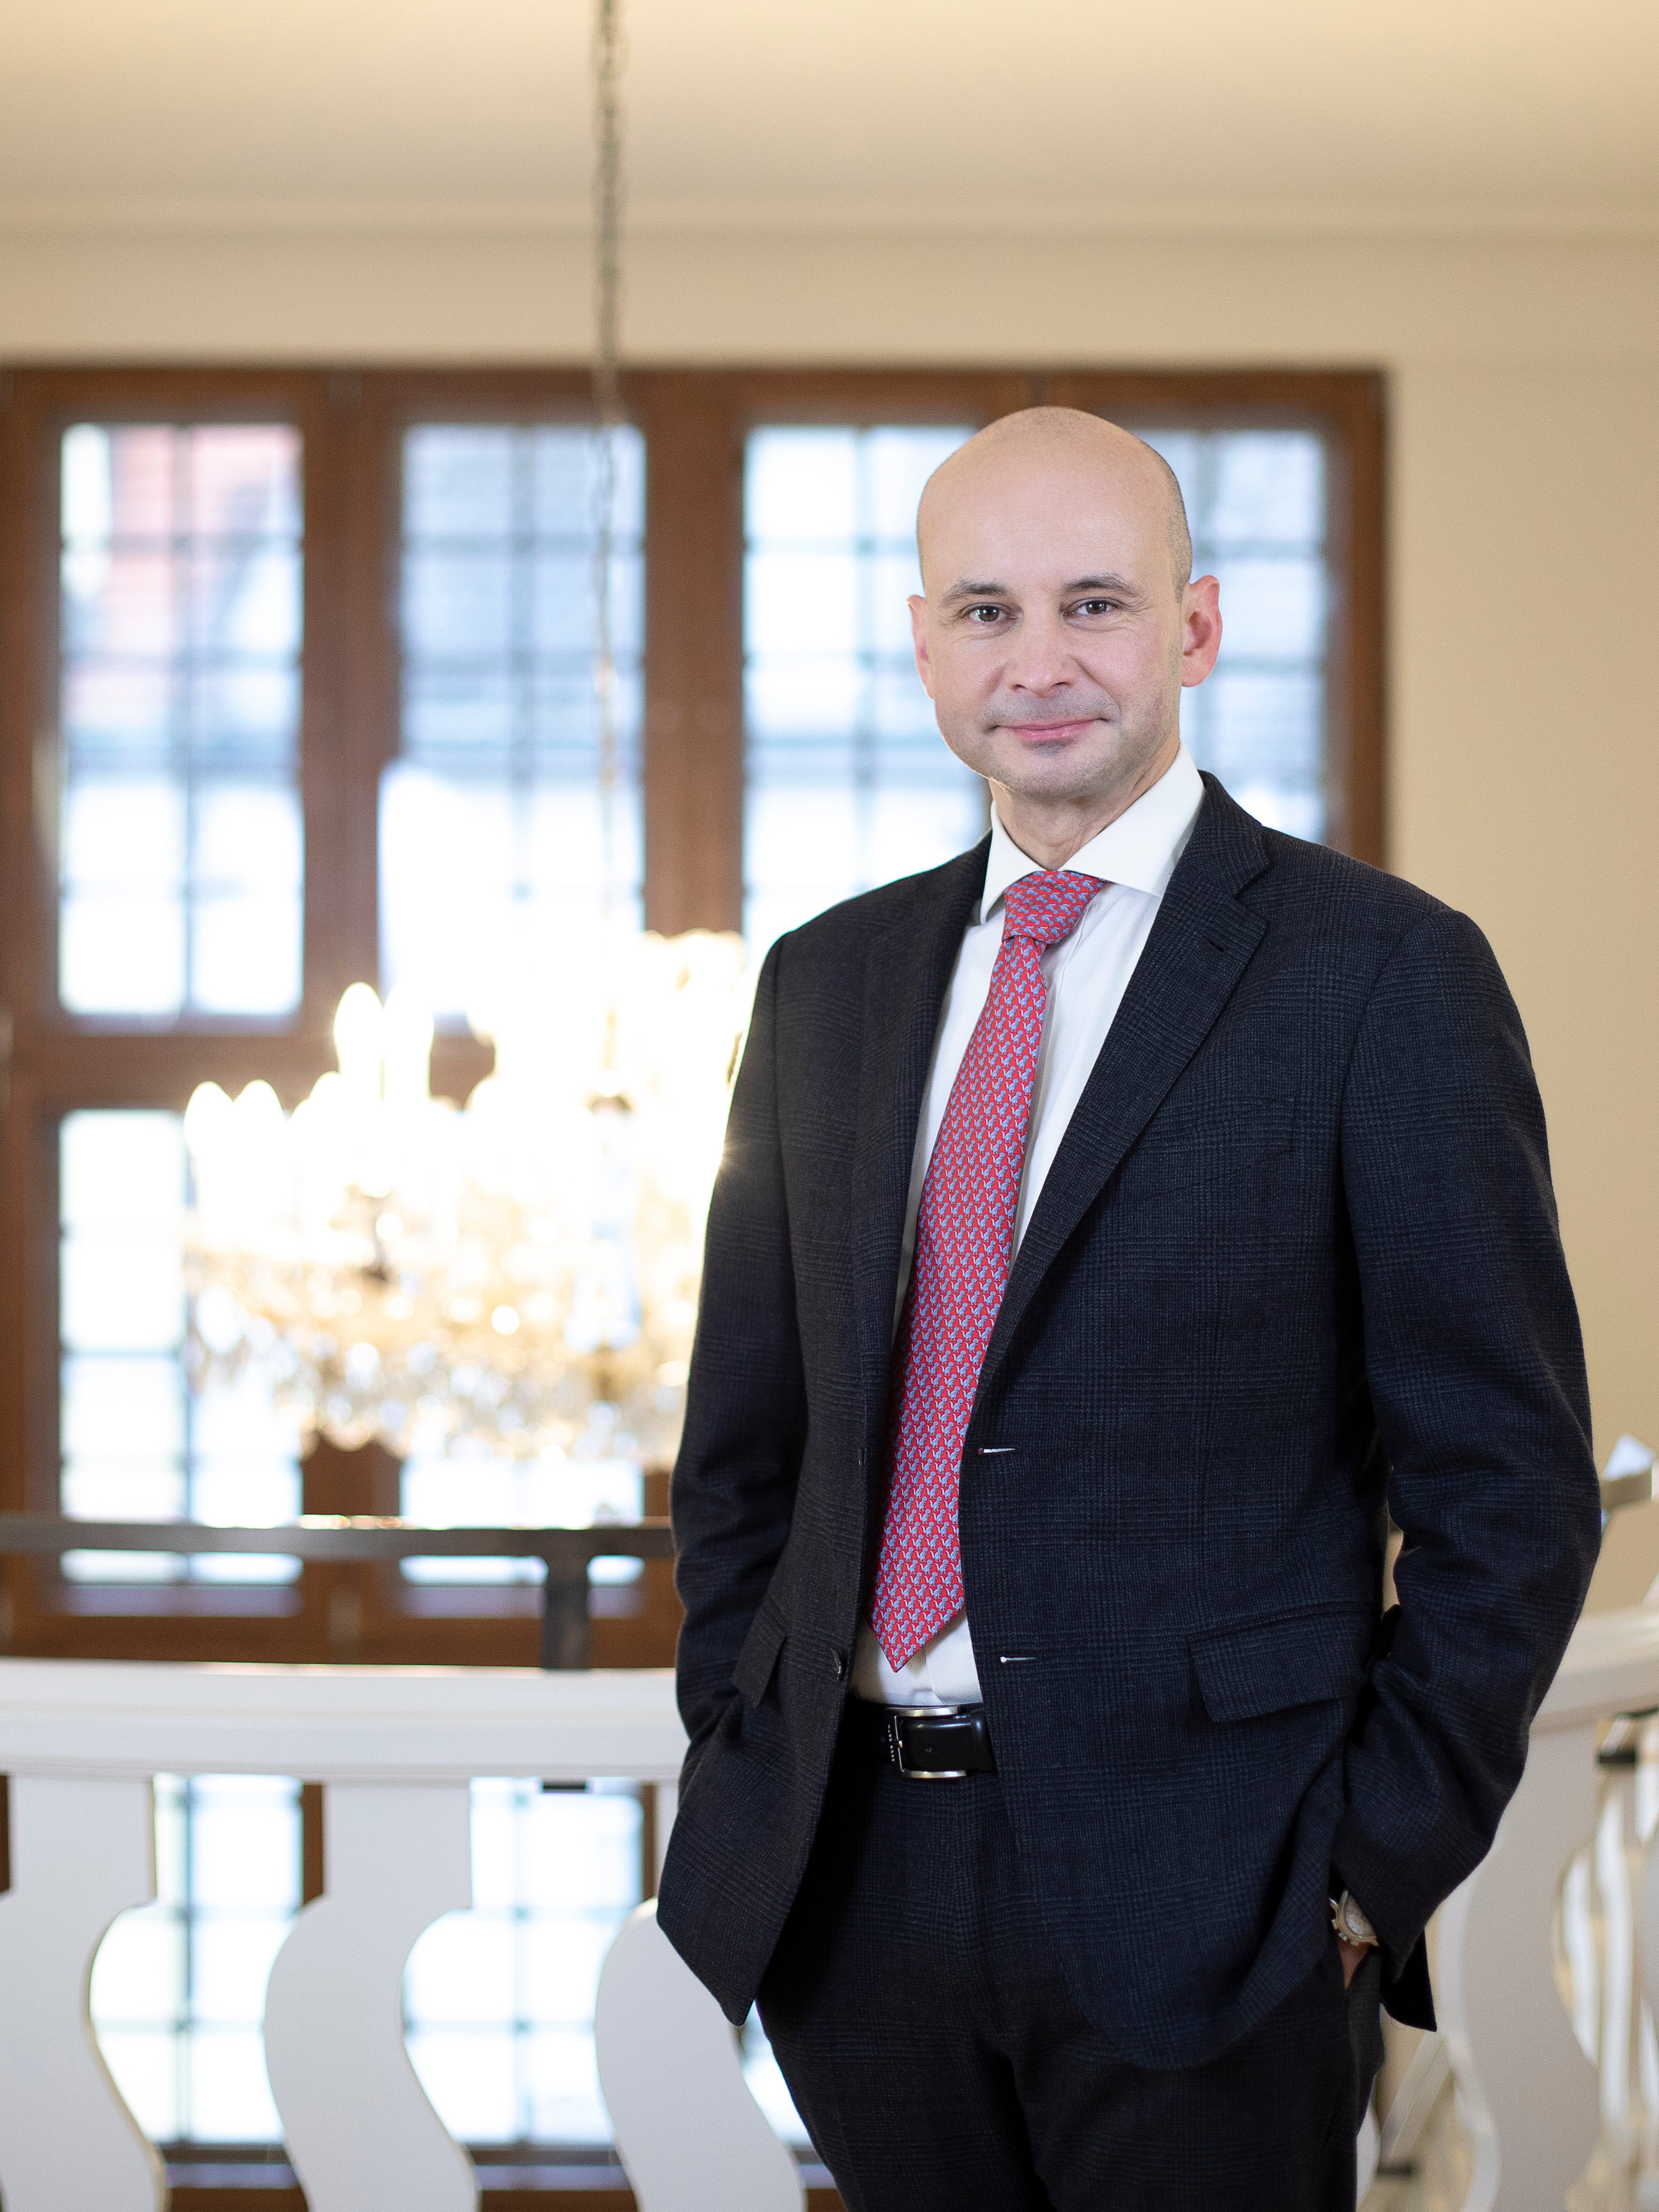 Dr. Stefan Pasternak – Chief Executive & Financial Officer